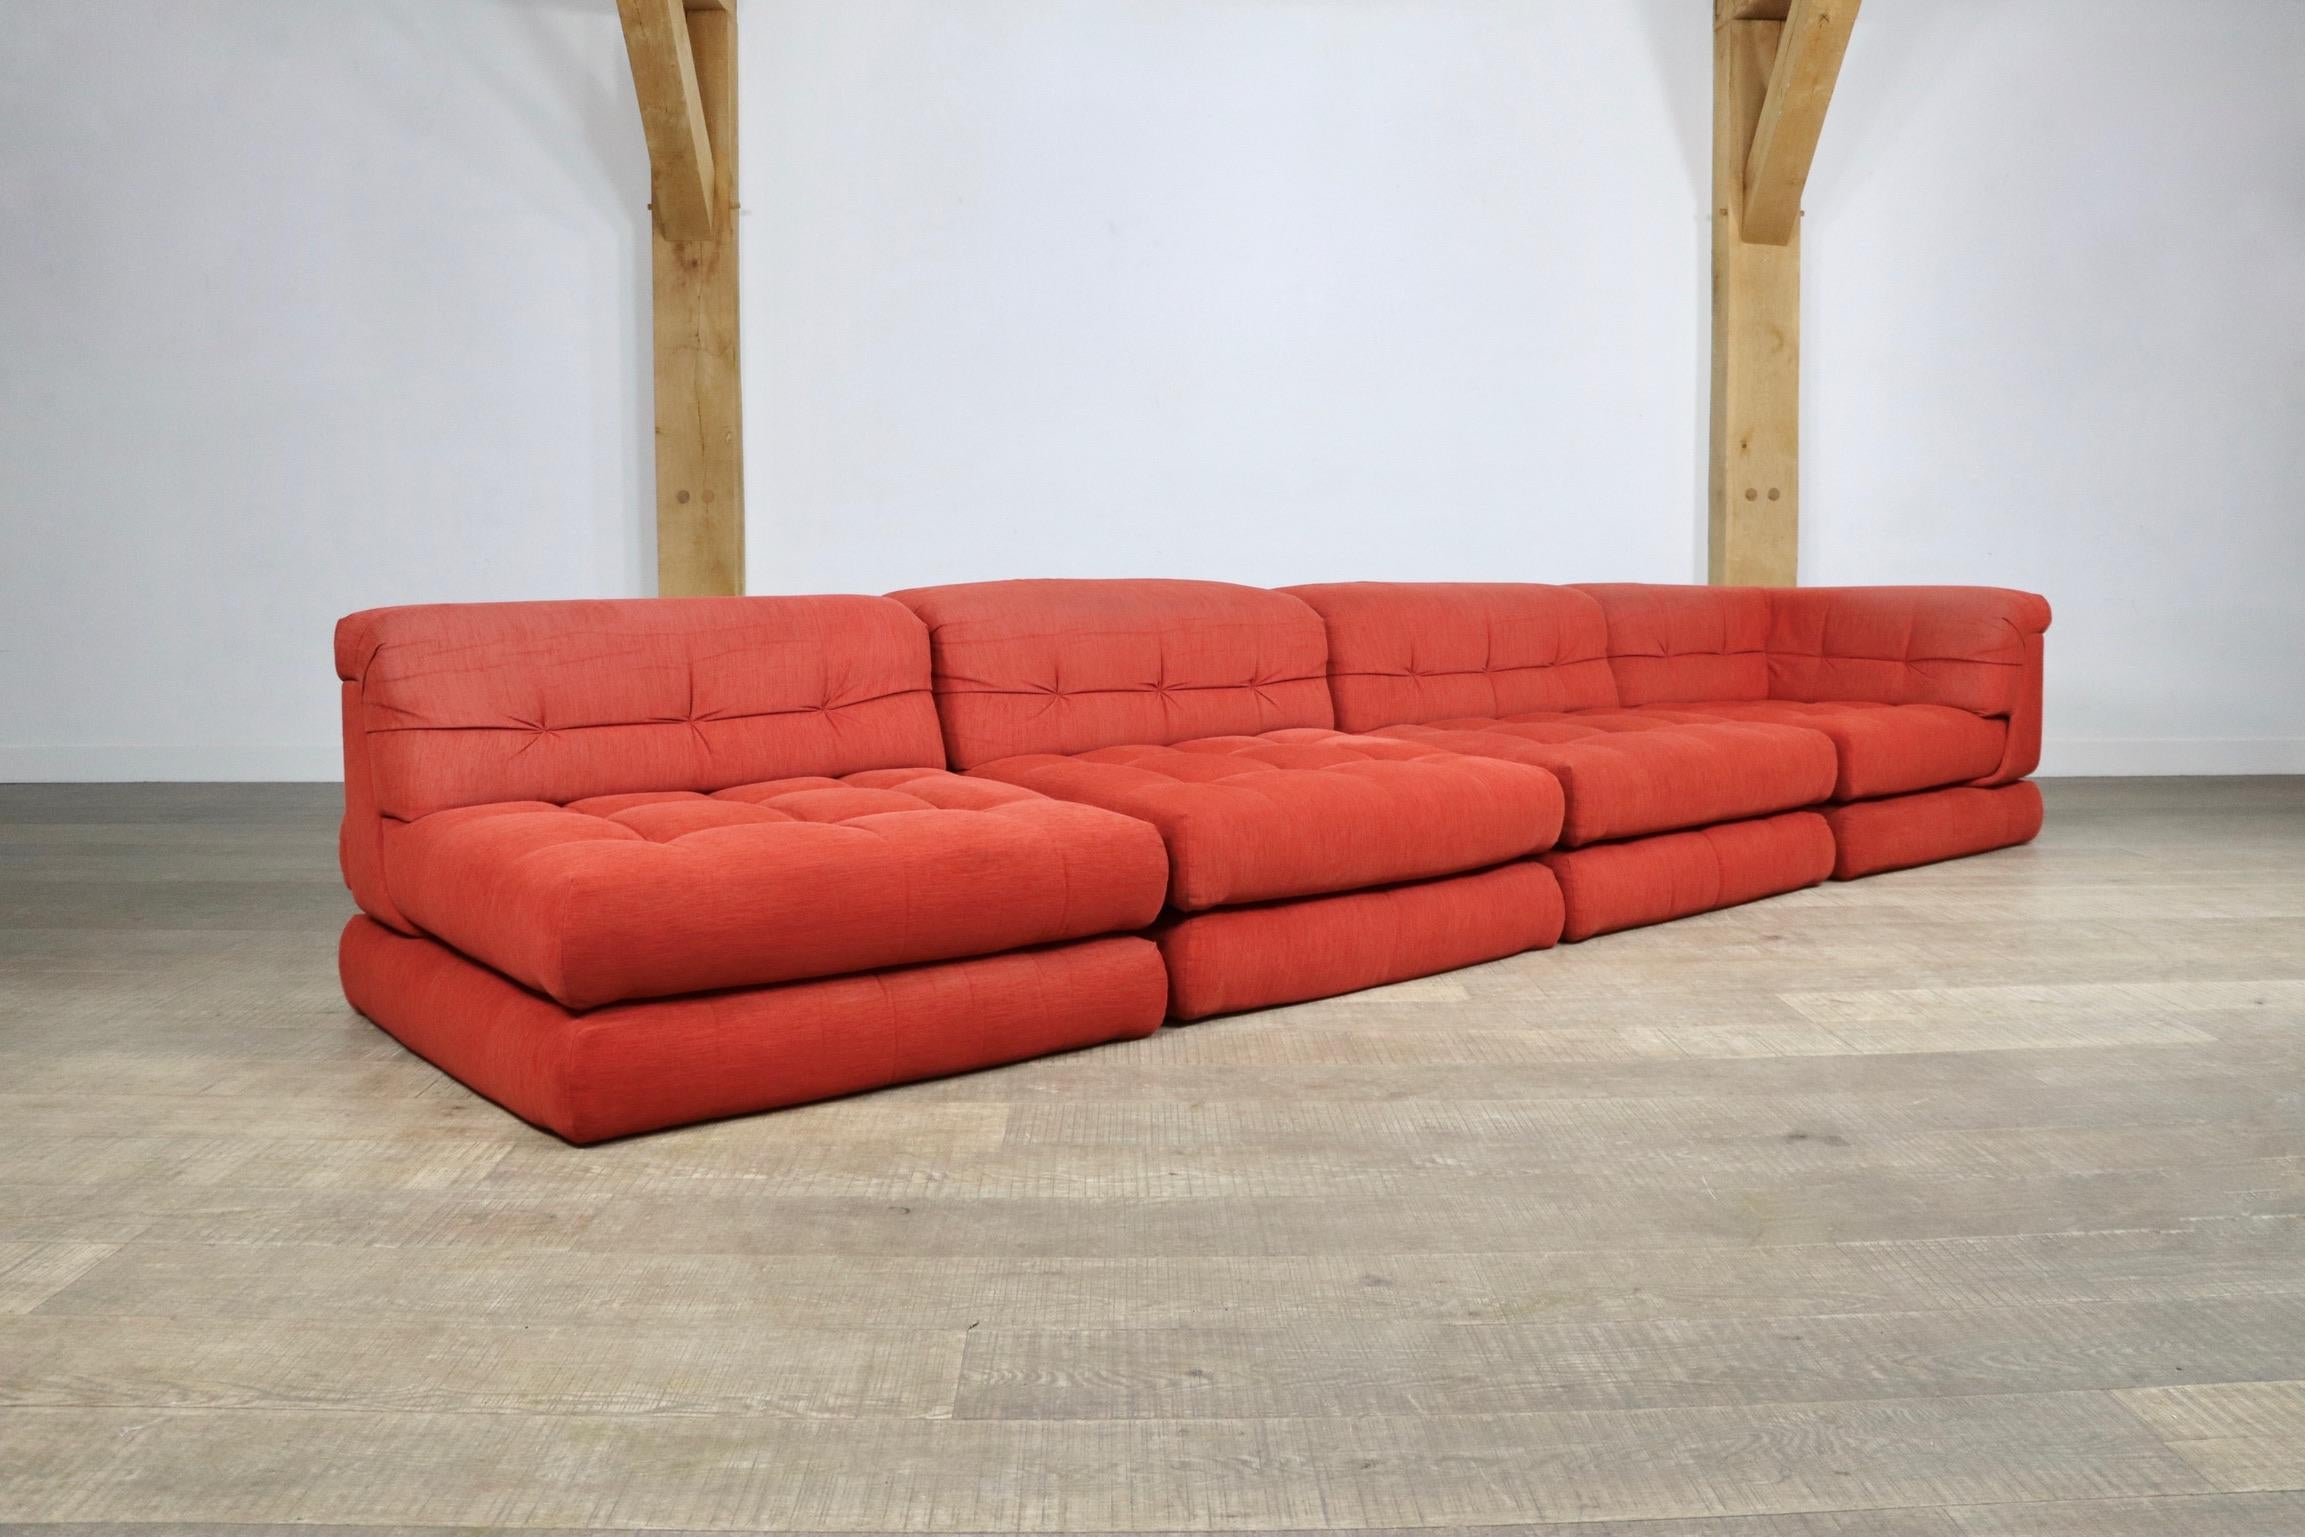 Mid-20th Century First Edition Mah Jong Sofa in Red by Roche Bobois, 1970s